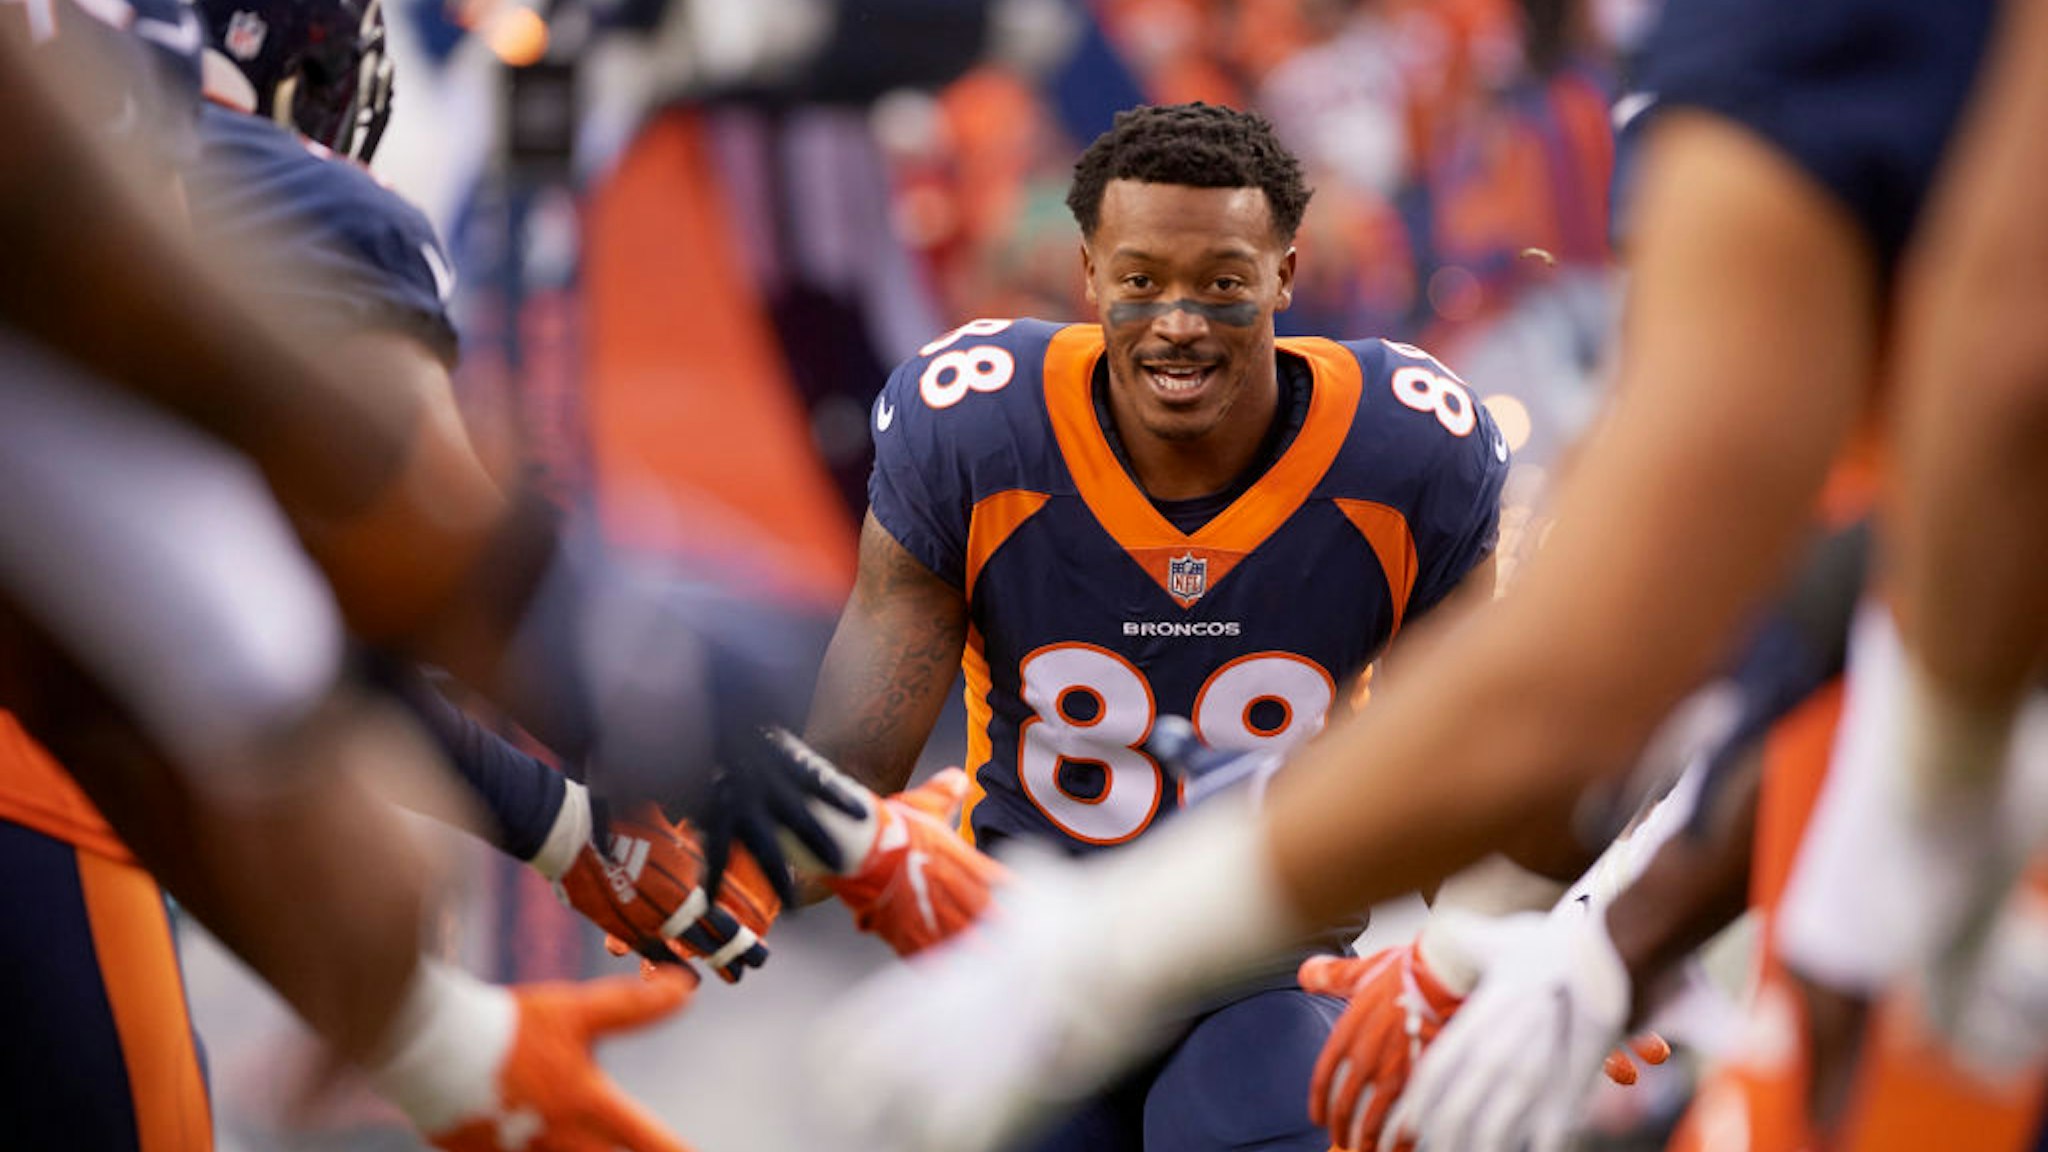 Football: Denver Broncos Demaryius Thomas (88) during introductions before game vs Kansas City Chiefs at Mile High Stadium. Denver, CO 10/1/2018 CREDIT: Jamie Schwaberow (Photo by Jamie Schwaberow /Sports Illustrated via Getty Images) (Set Number: X162180 TK1 )